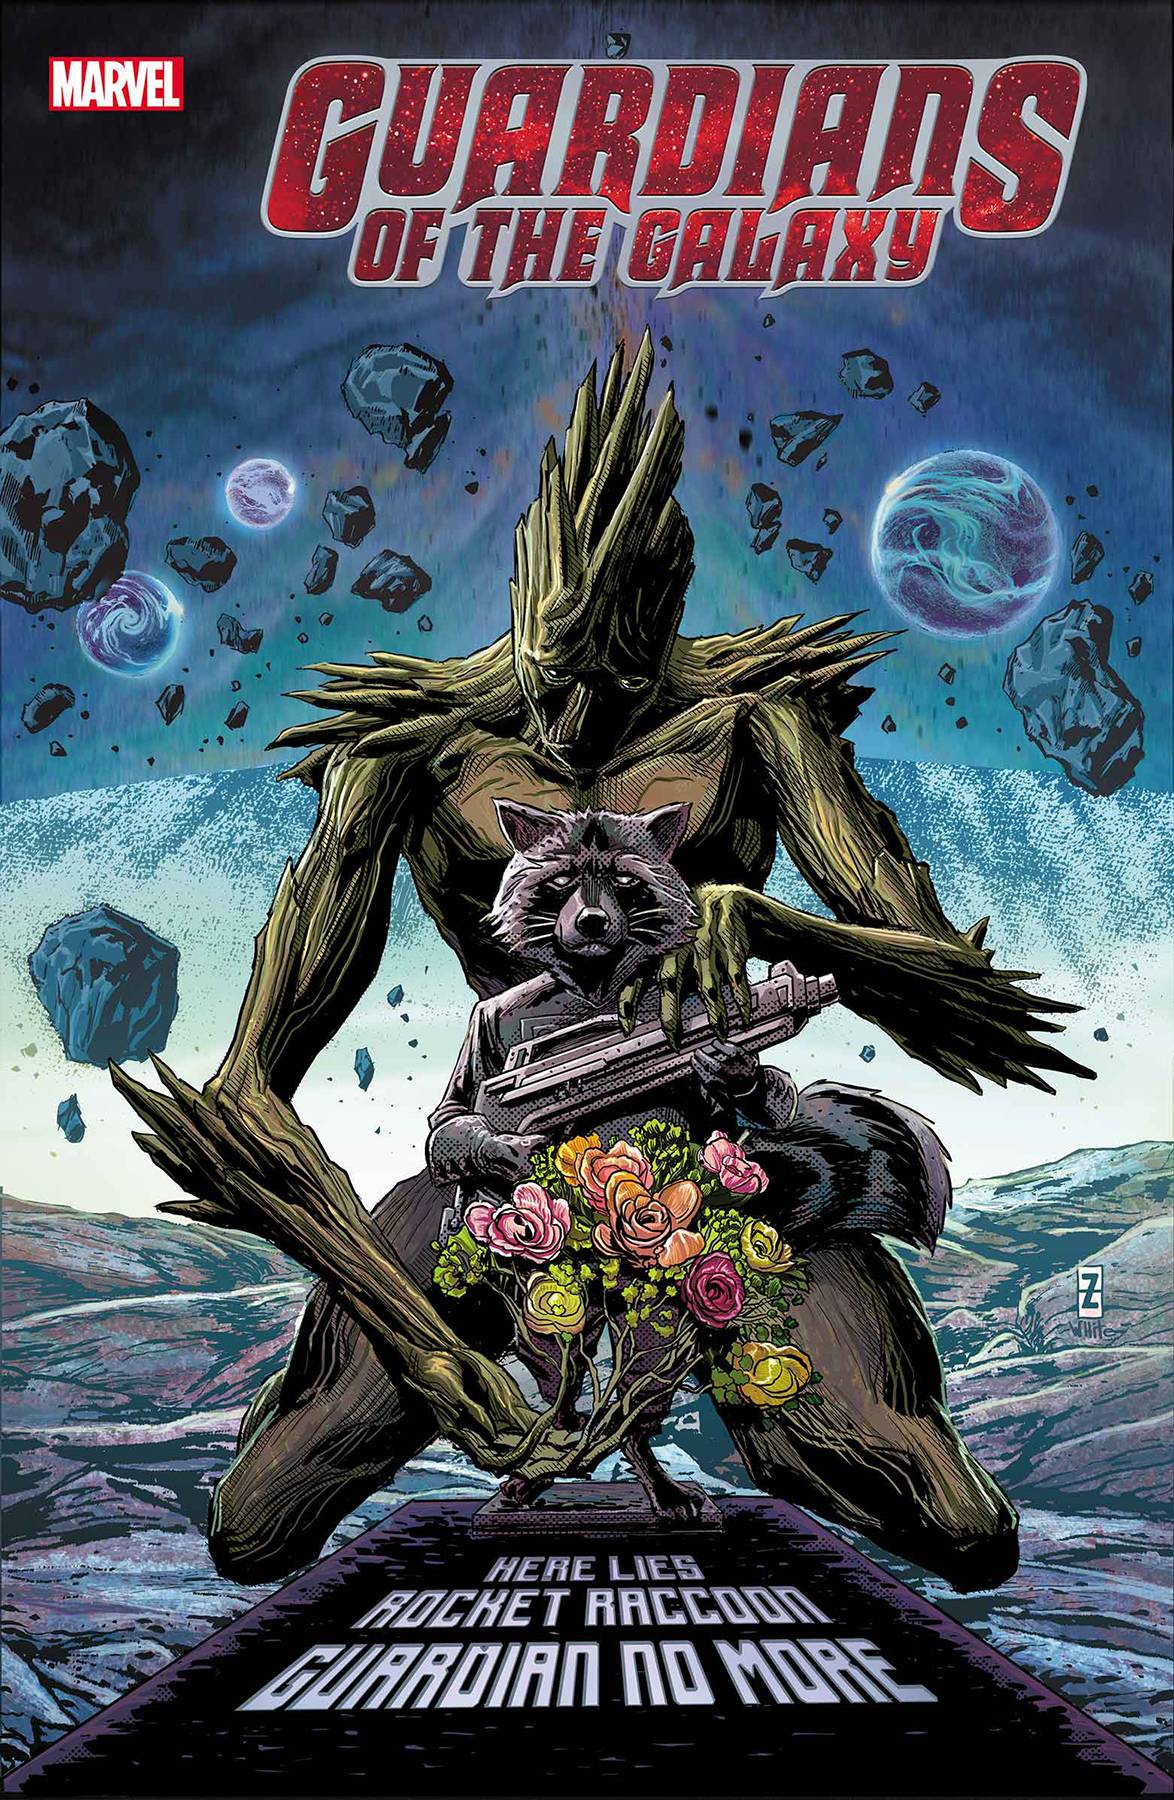 GUARDIANS OF THE GALAXY #10 10/16/19 FOC 09/23/19